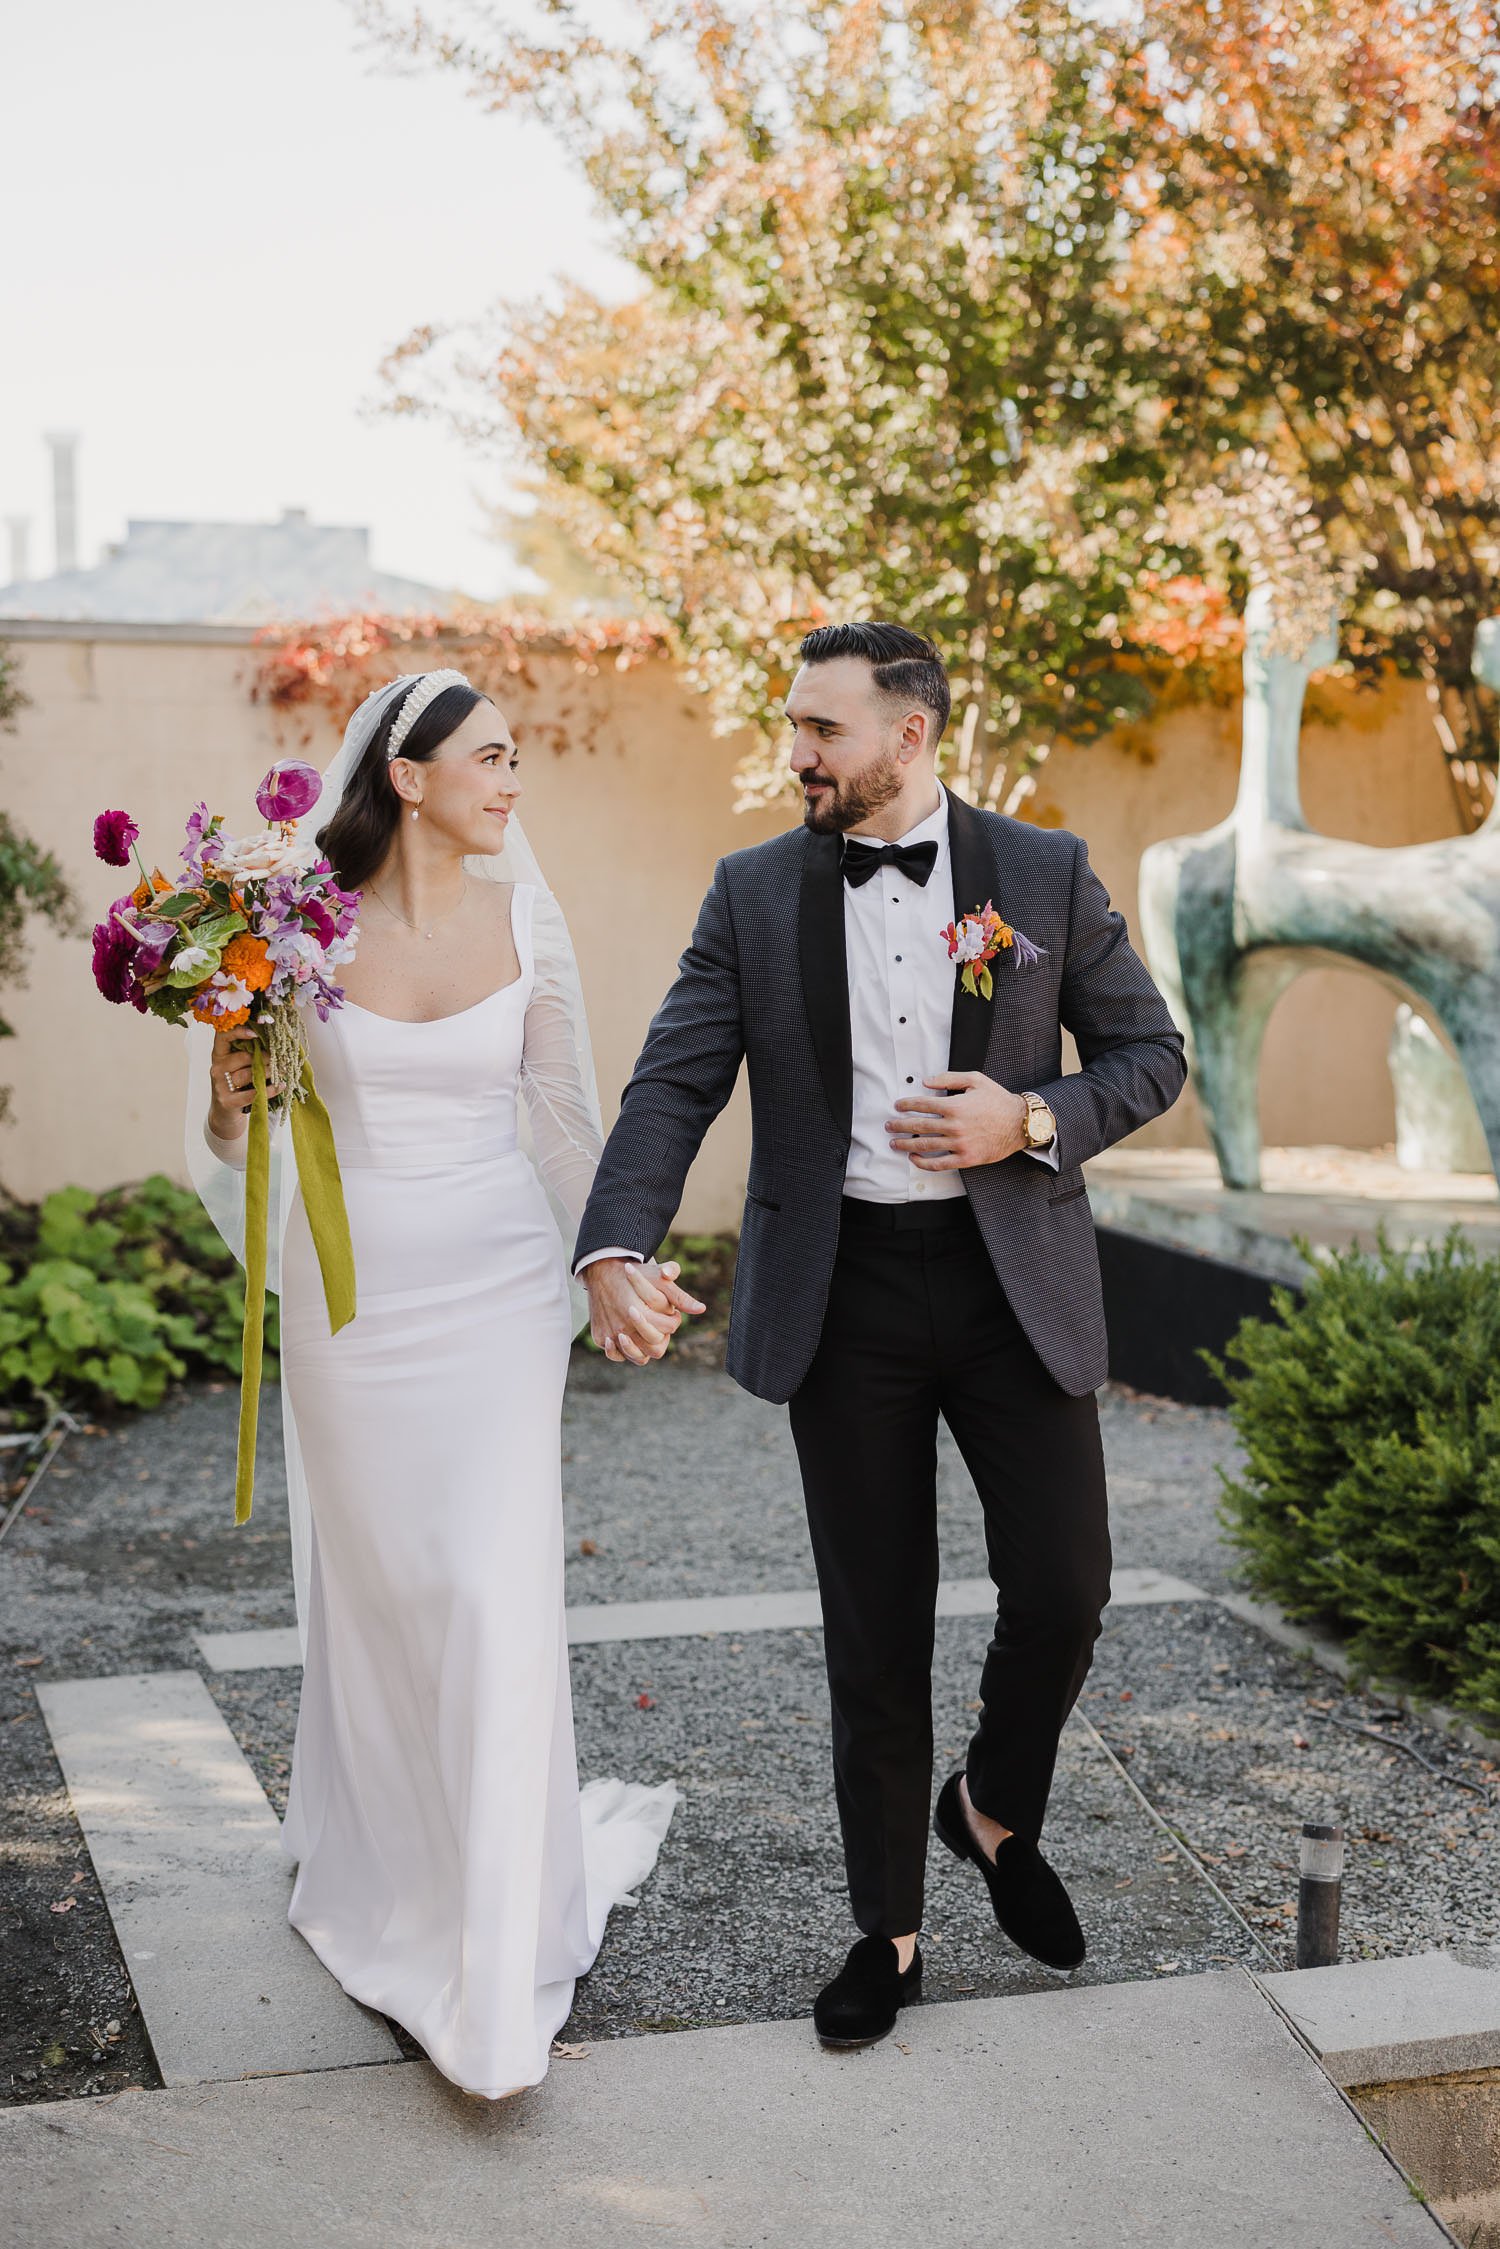 Chic, colorful fall wedding at Grounds for Sculpture